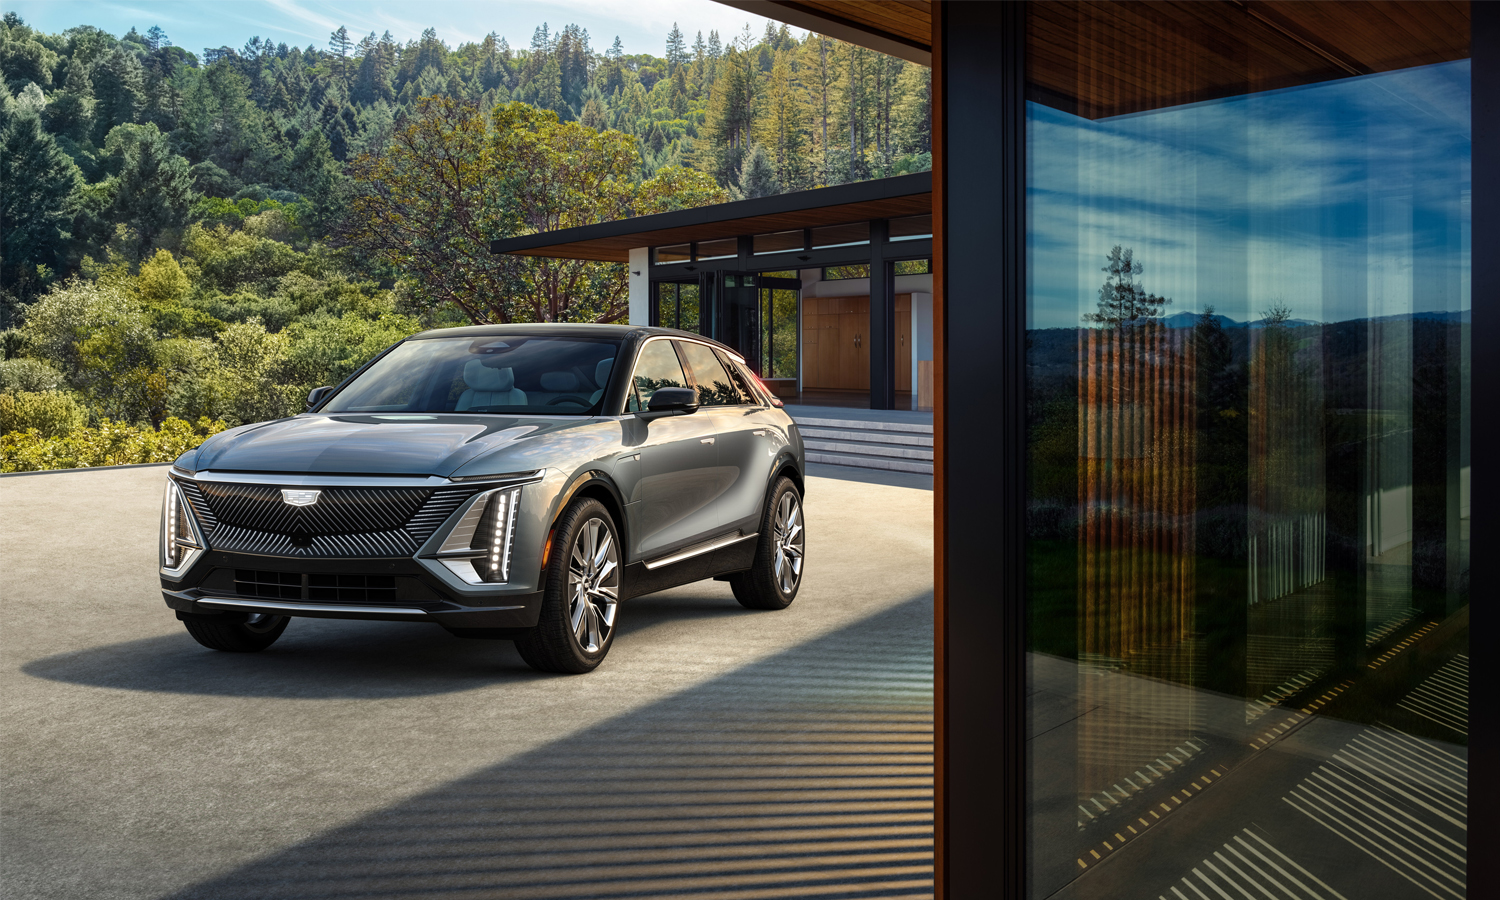 Cruise in silent, electric, technology-assisted, Cadillac luxury.